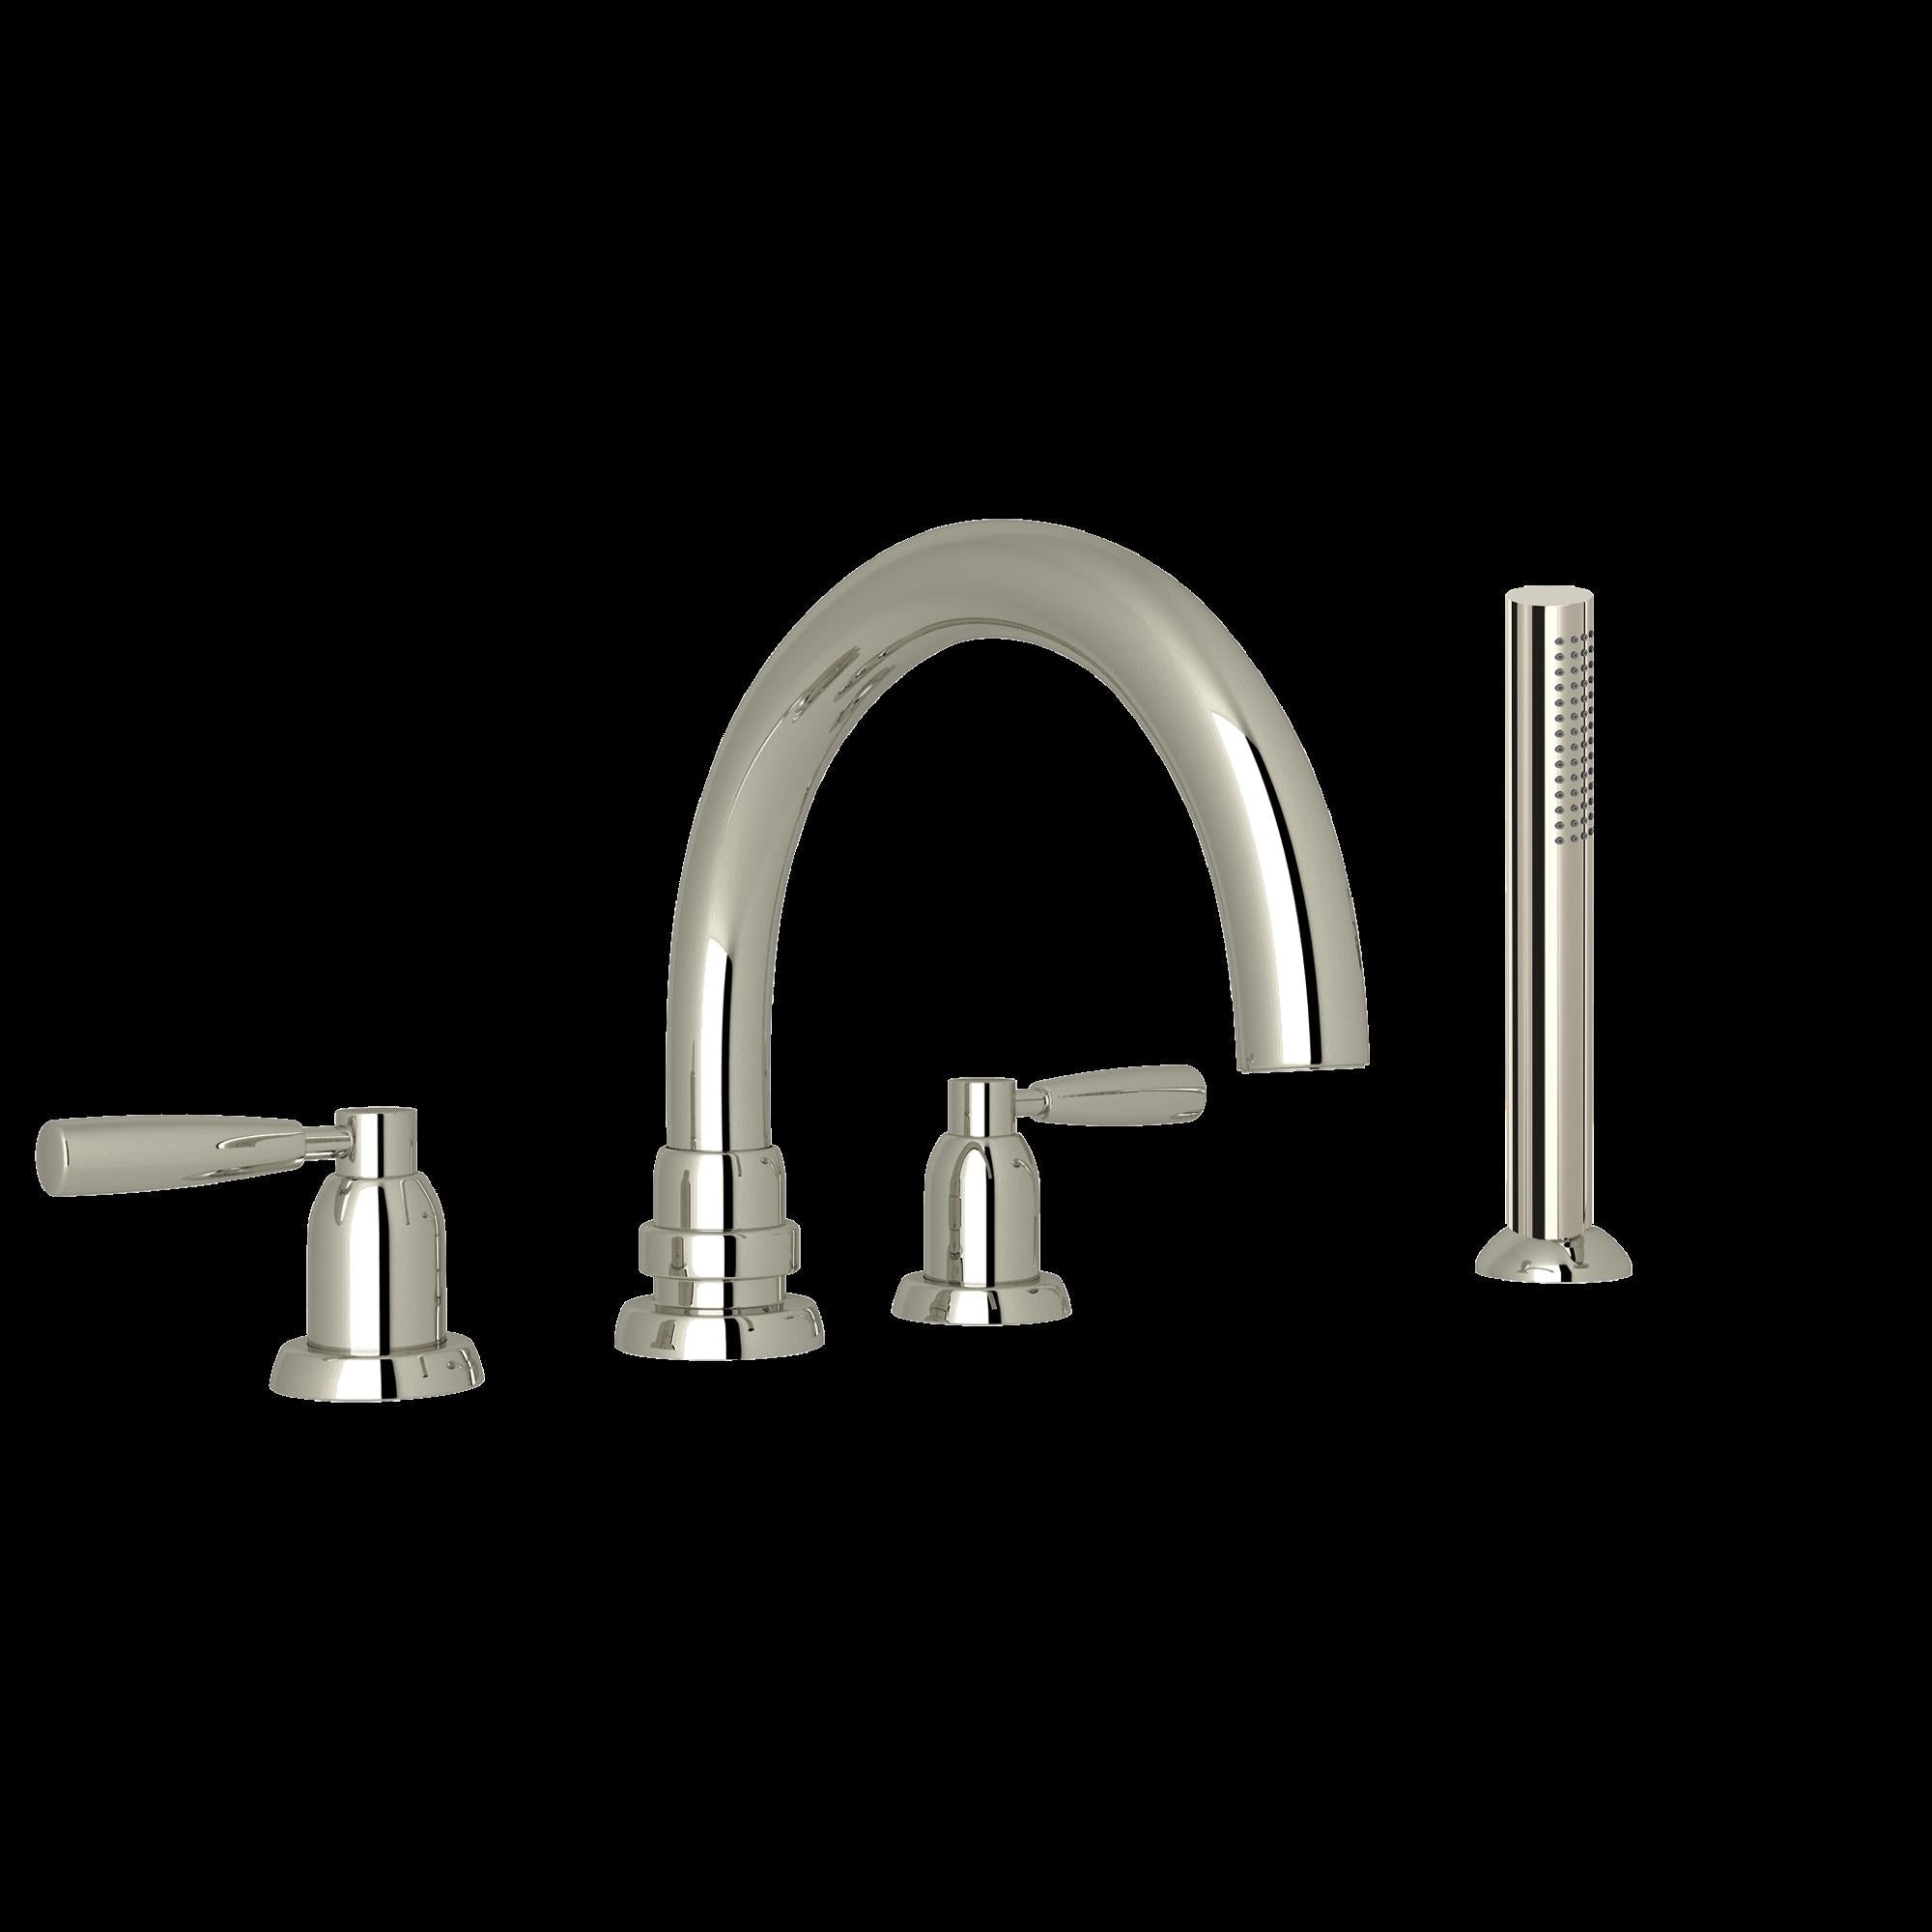 Perrin & Rowe U.3975 Holborn 4-Hole Deck Mount Tub Filler with C-Spout